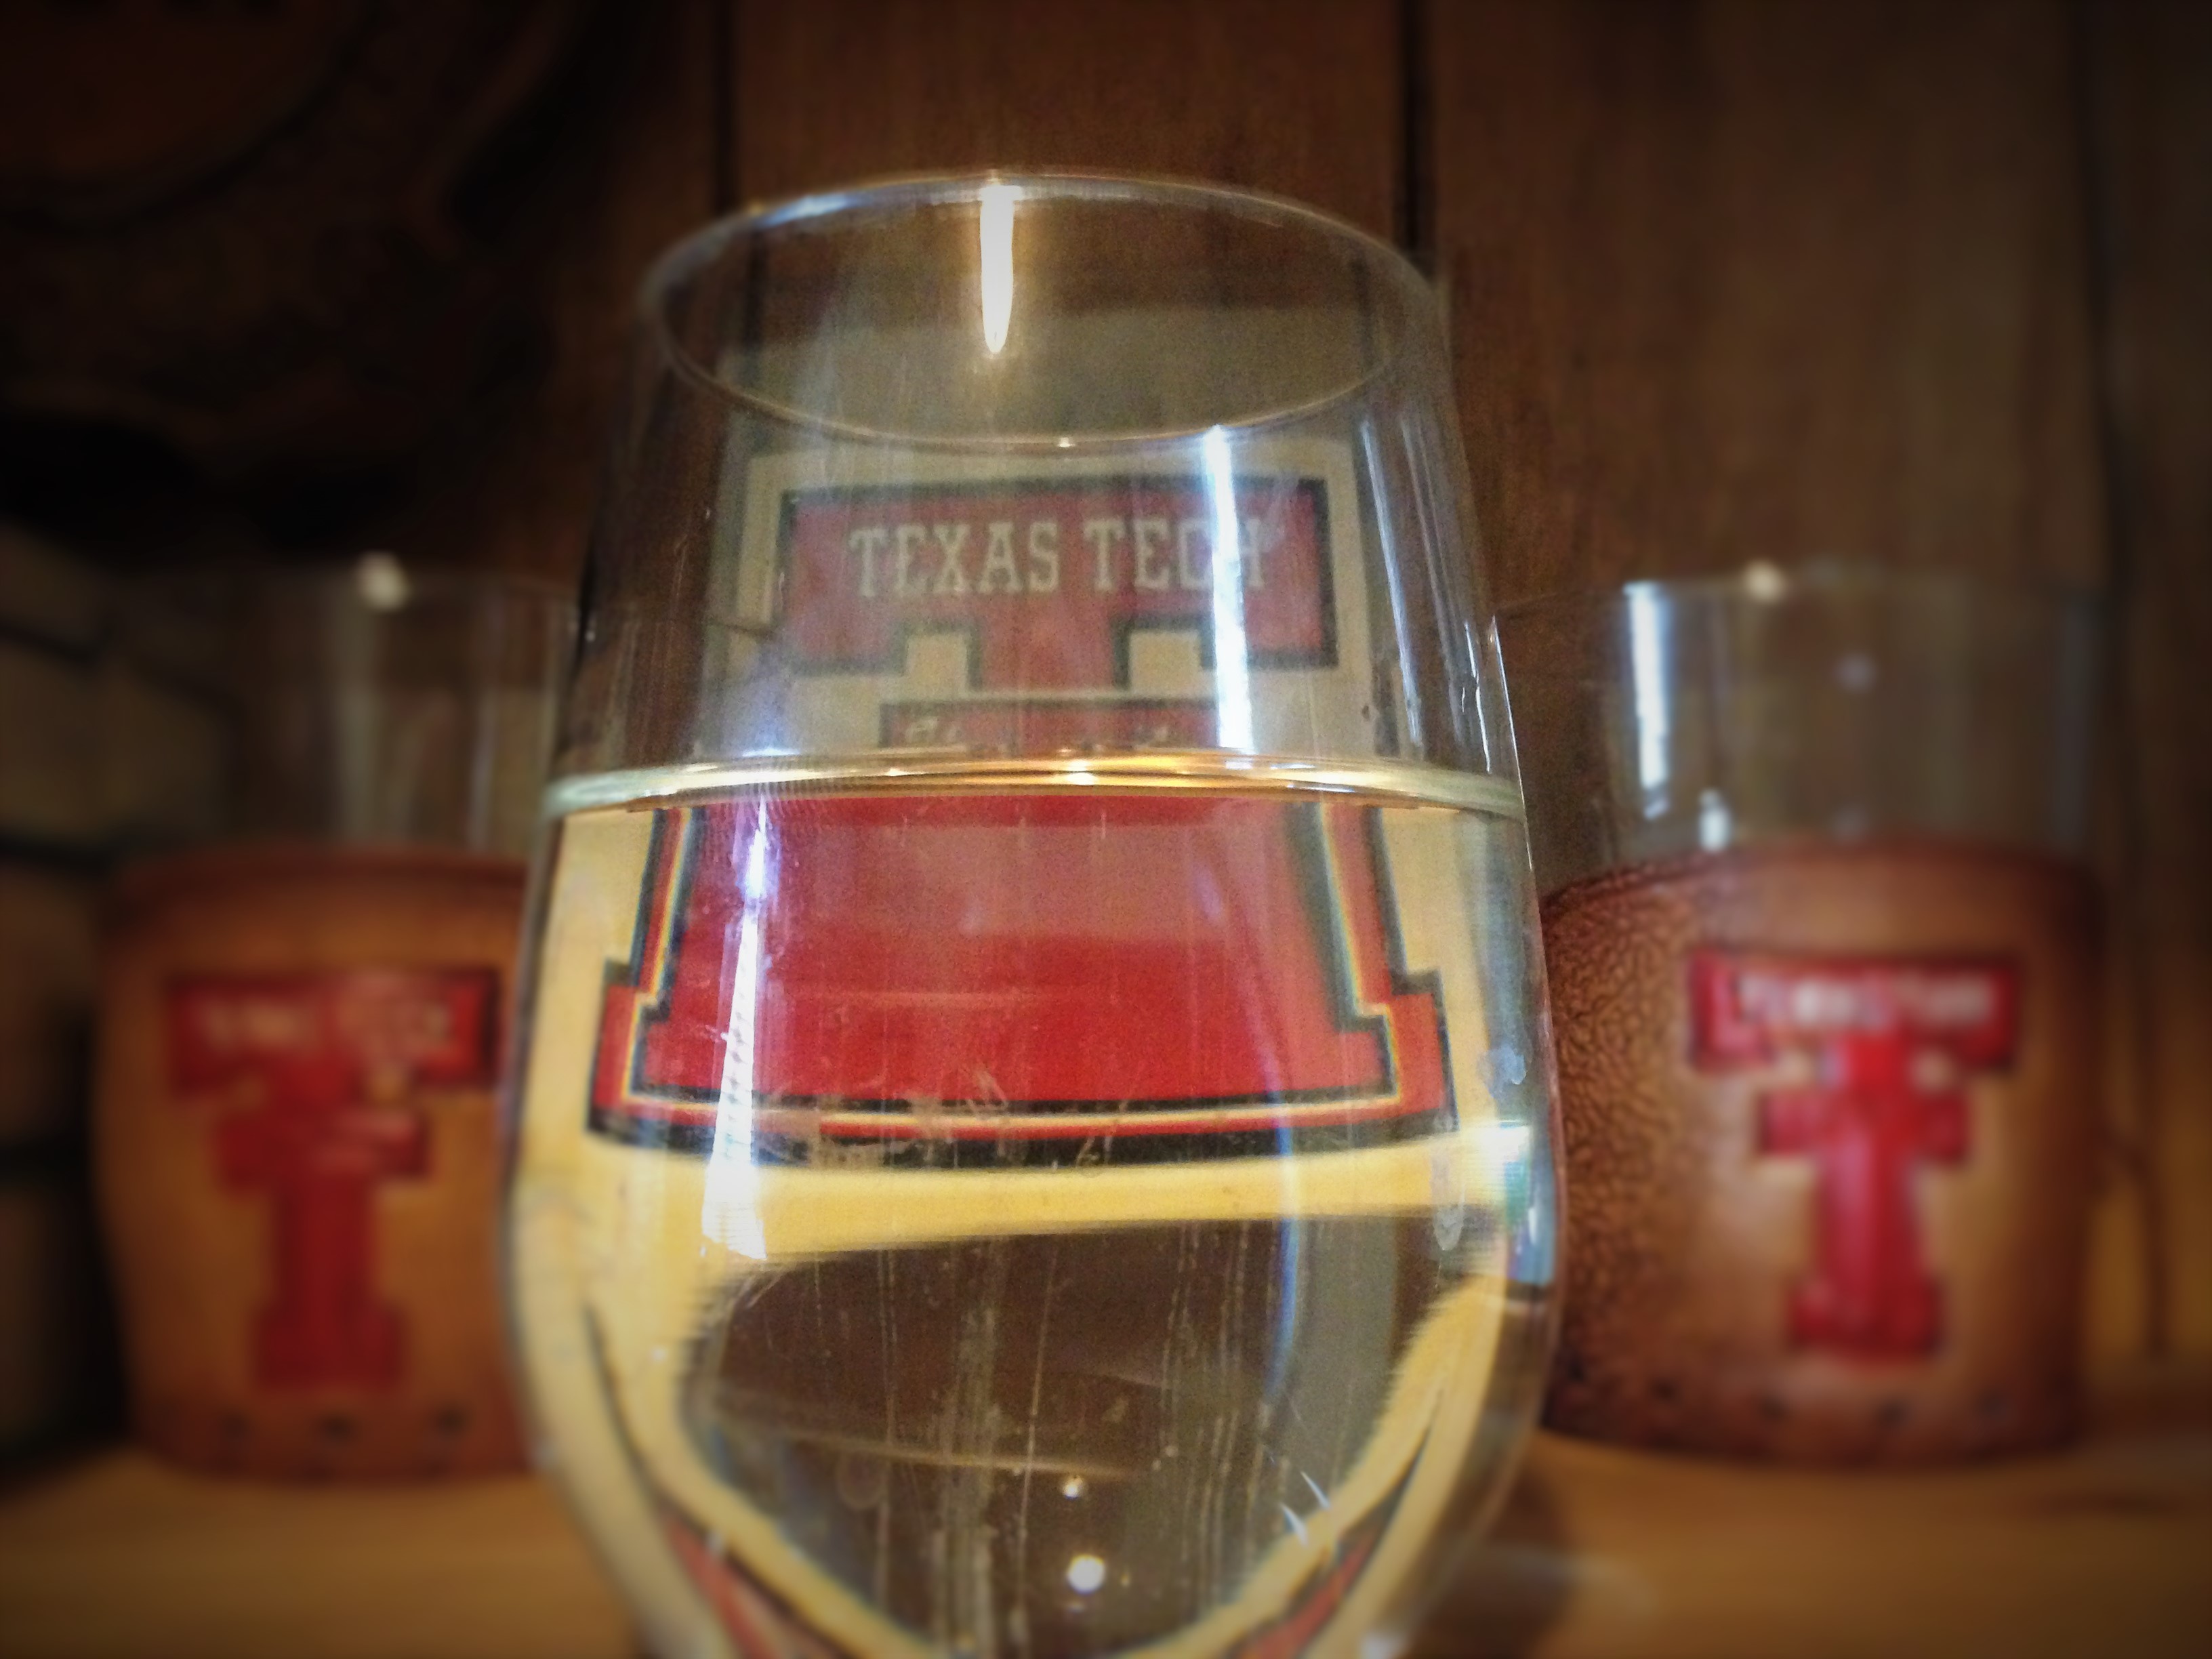 Texas Tech Football: There’s Something in the Water